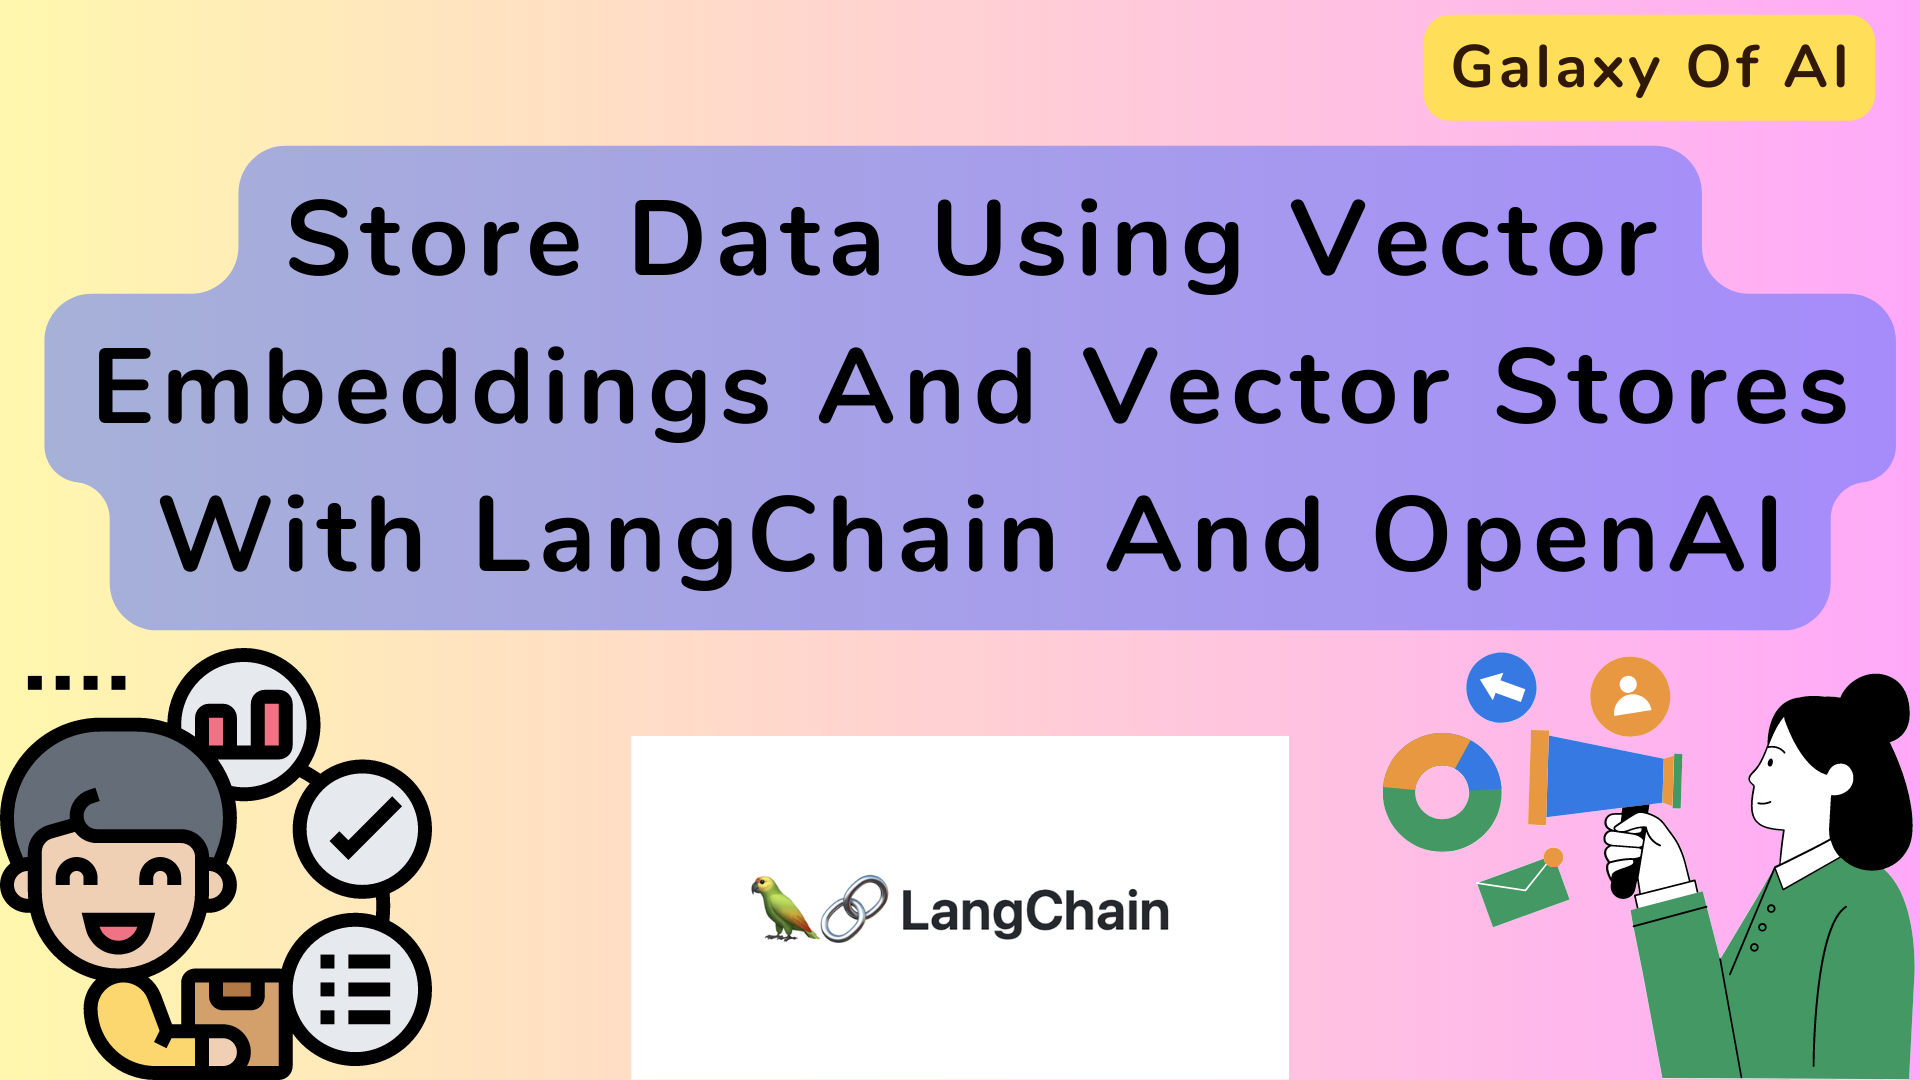 Store Data Using Vector Embeddings And Vector Stores With LangChain And OpenAI